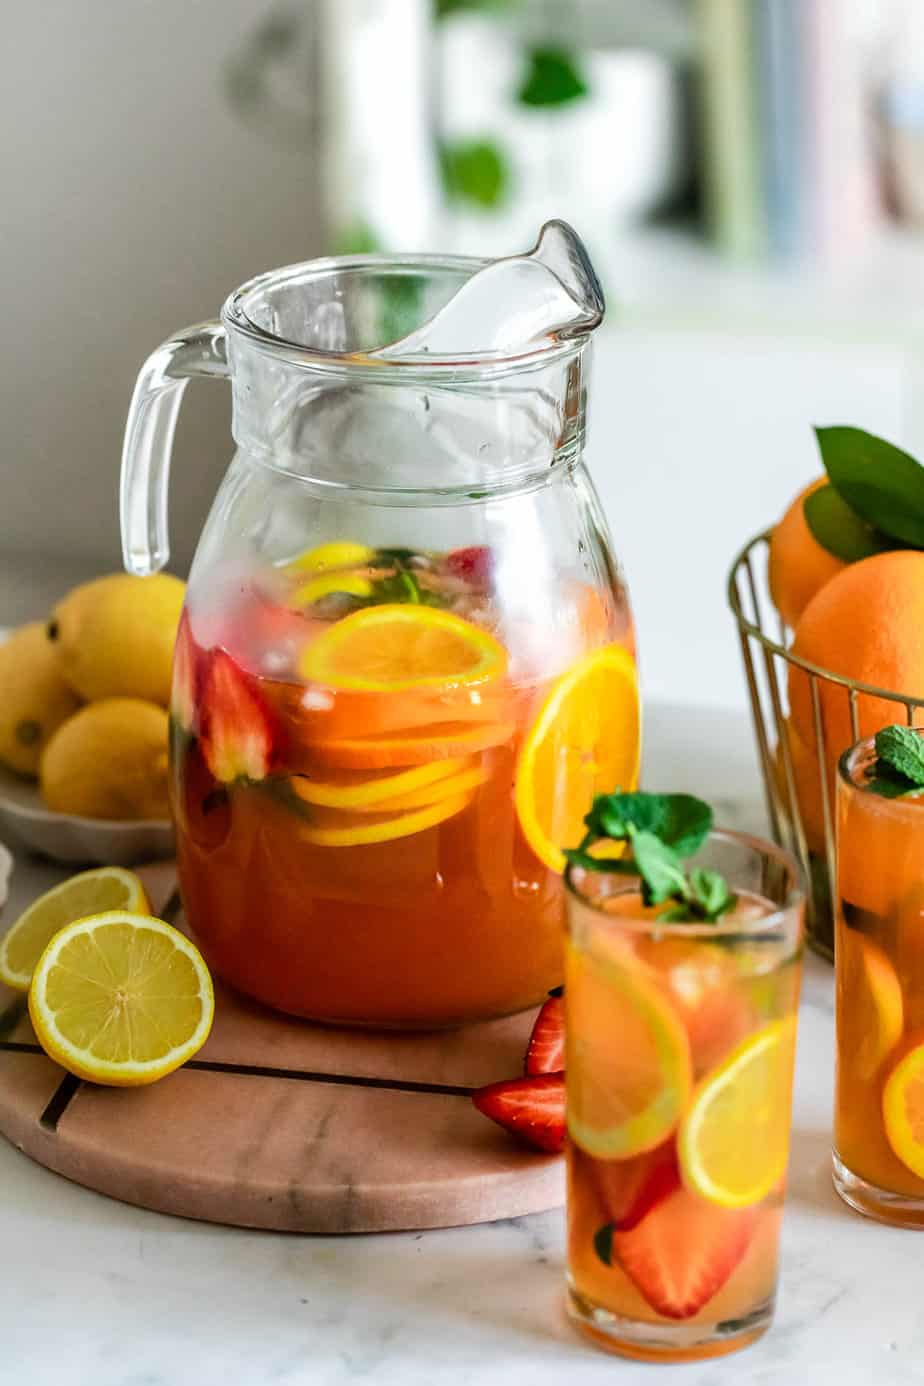 A jug and glass full of peach ice tea with fresh fruit.